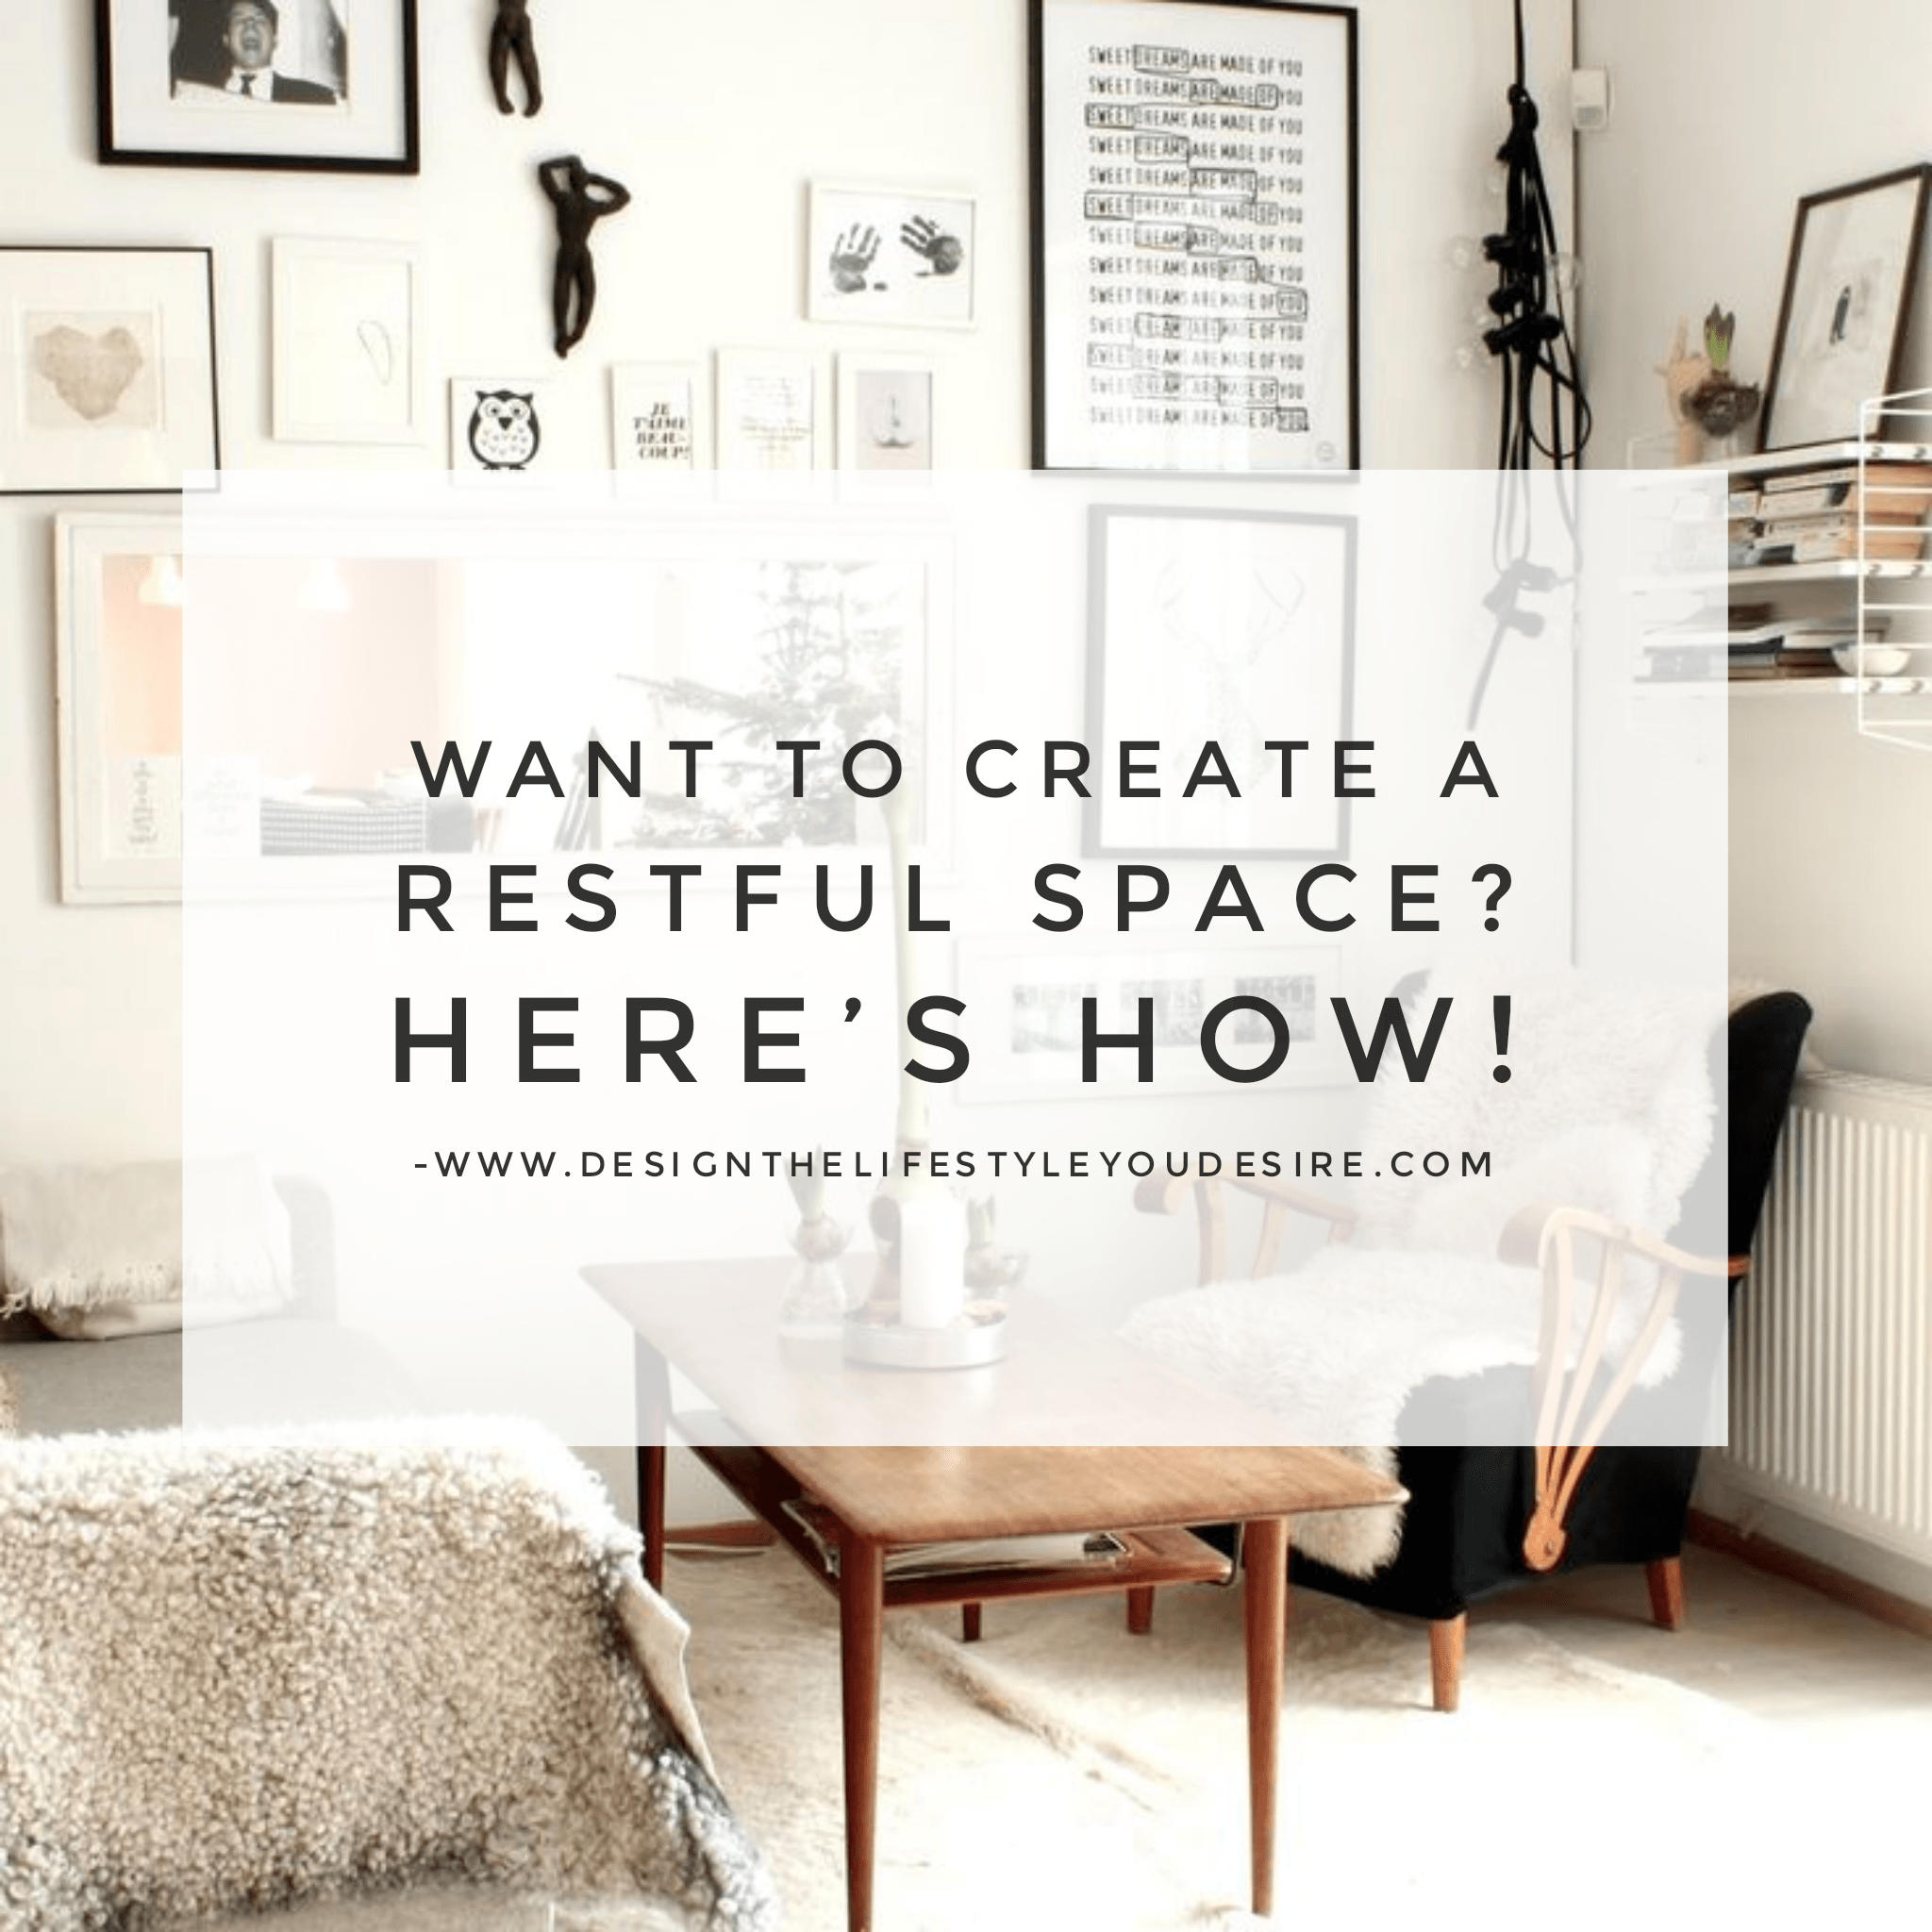 Want to Create a Restful Space? Here’s How!